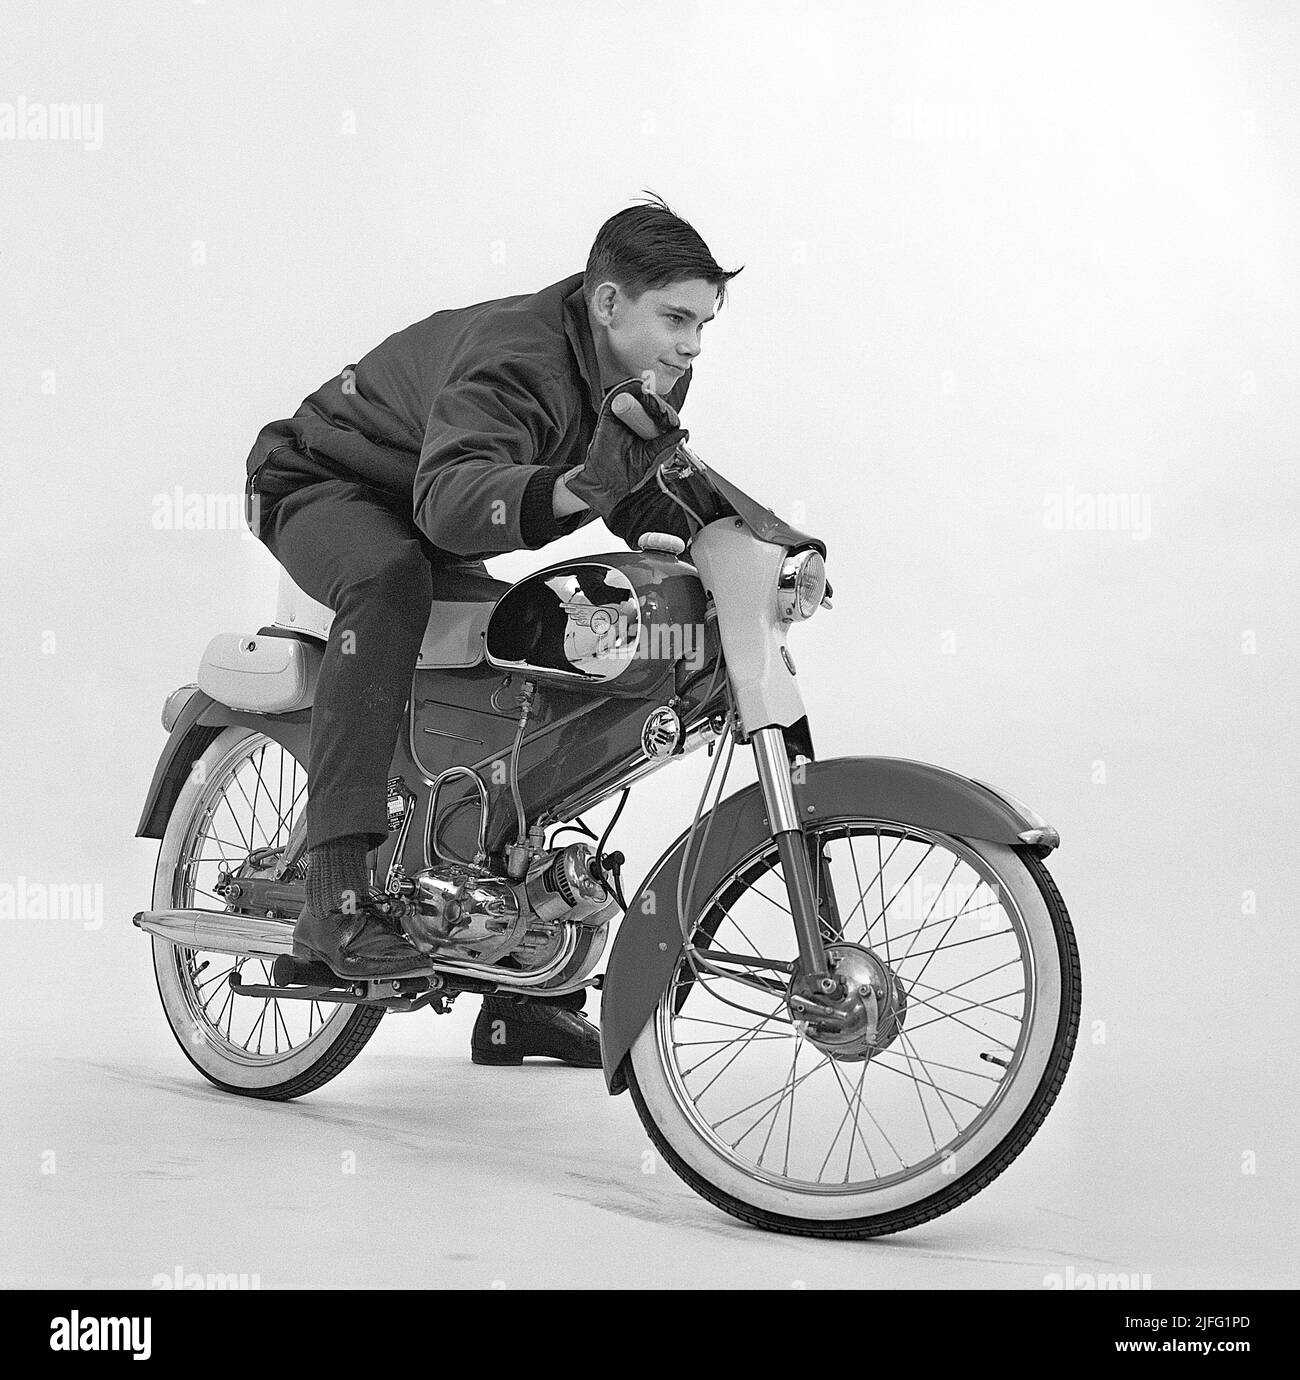 Teenager in the 1960s. A boy in a photographer's studio on a moped, Tomos Sport,  made by the Slovenian company Tomos and exported to Sweden in large numbers in the beginning of the 1960s. With it's long seat and the low handlebars, this sportsmodell was considered the best and toughest looking moped. Sweden 1961 Kristoffersson ref CX85-1 Stock Photo